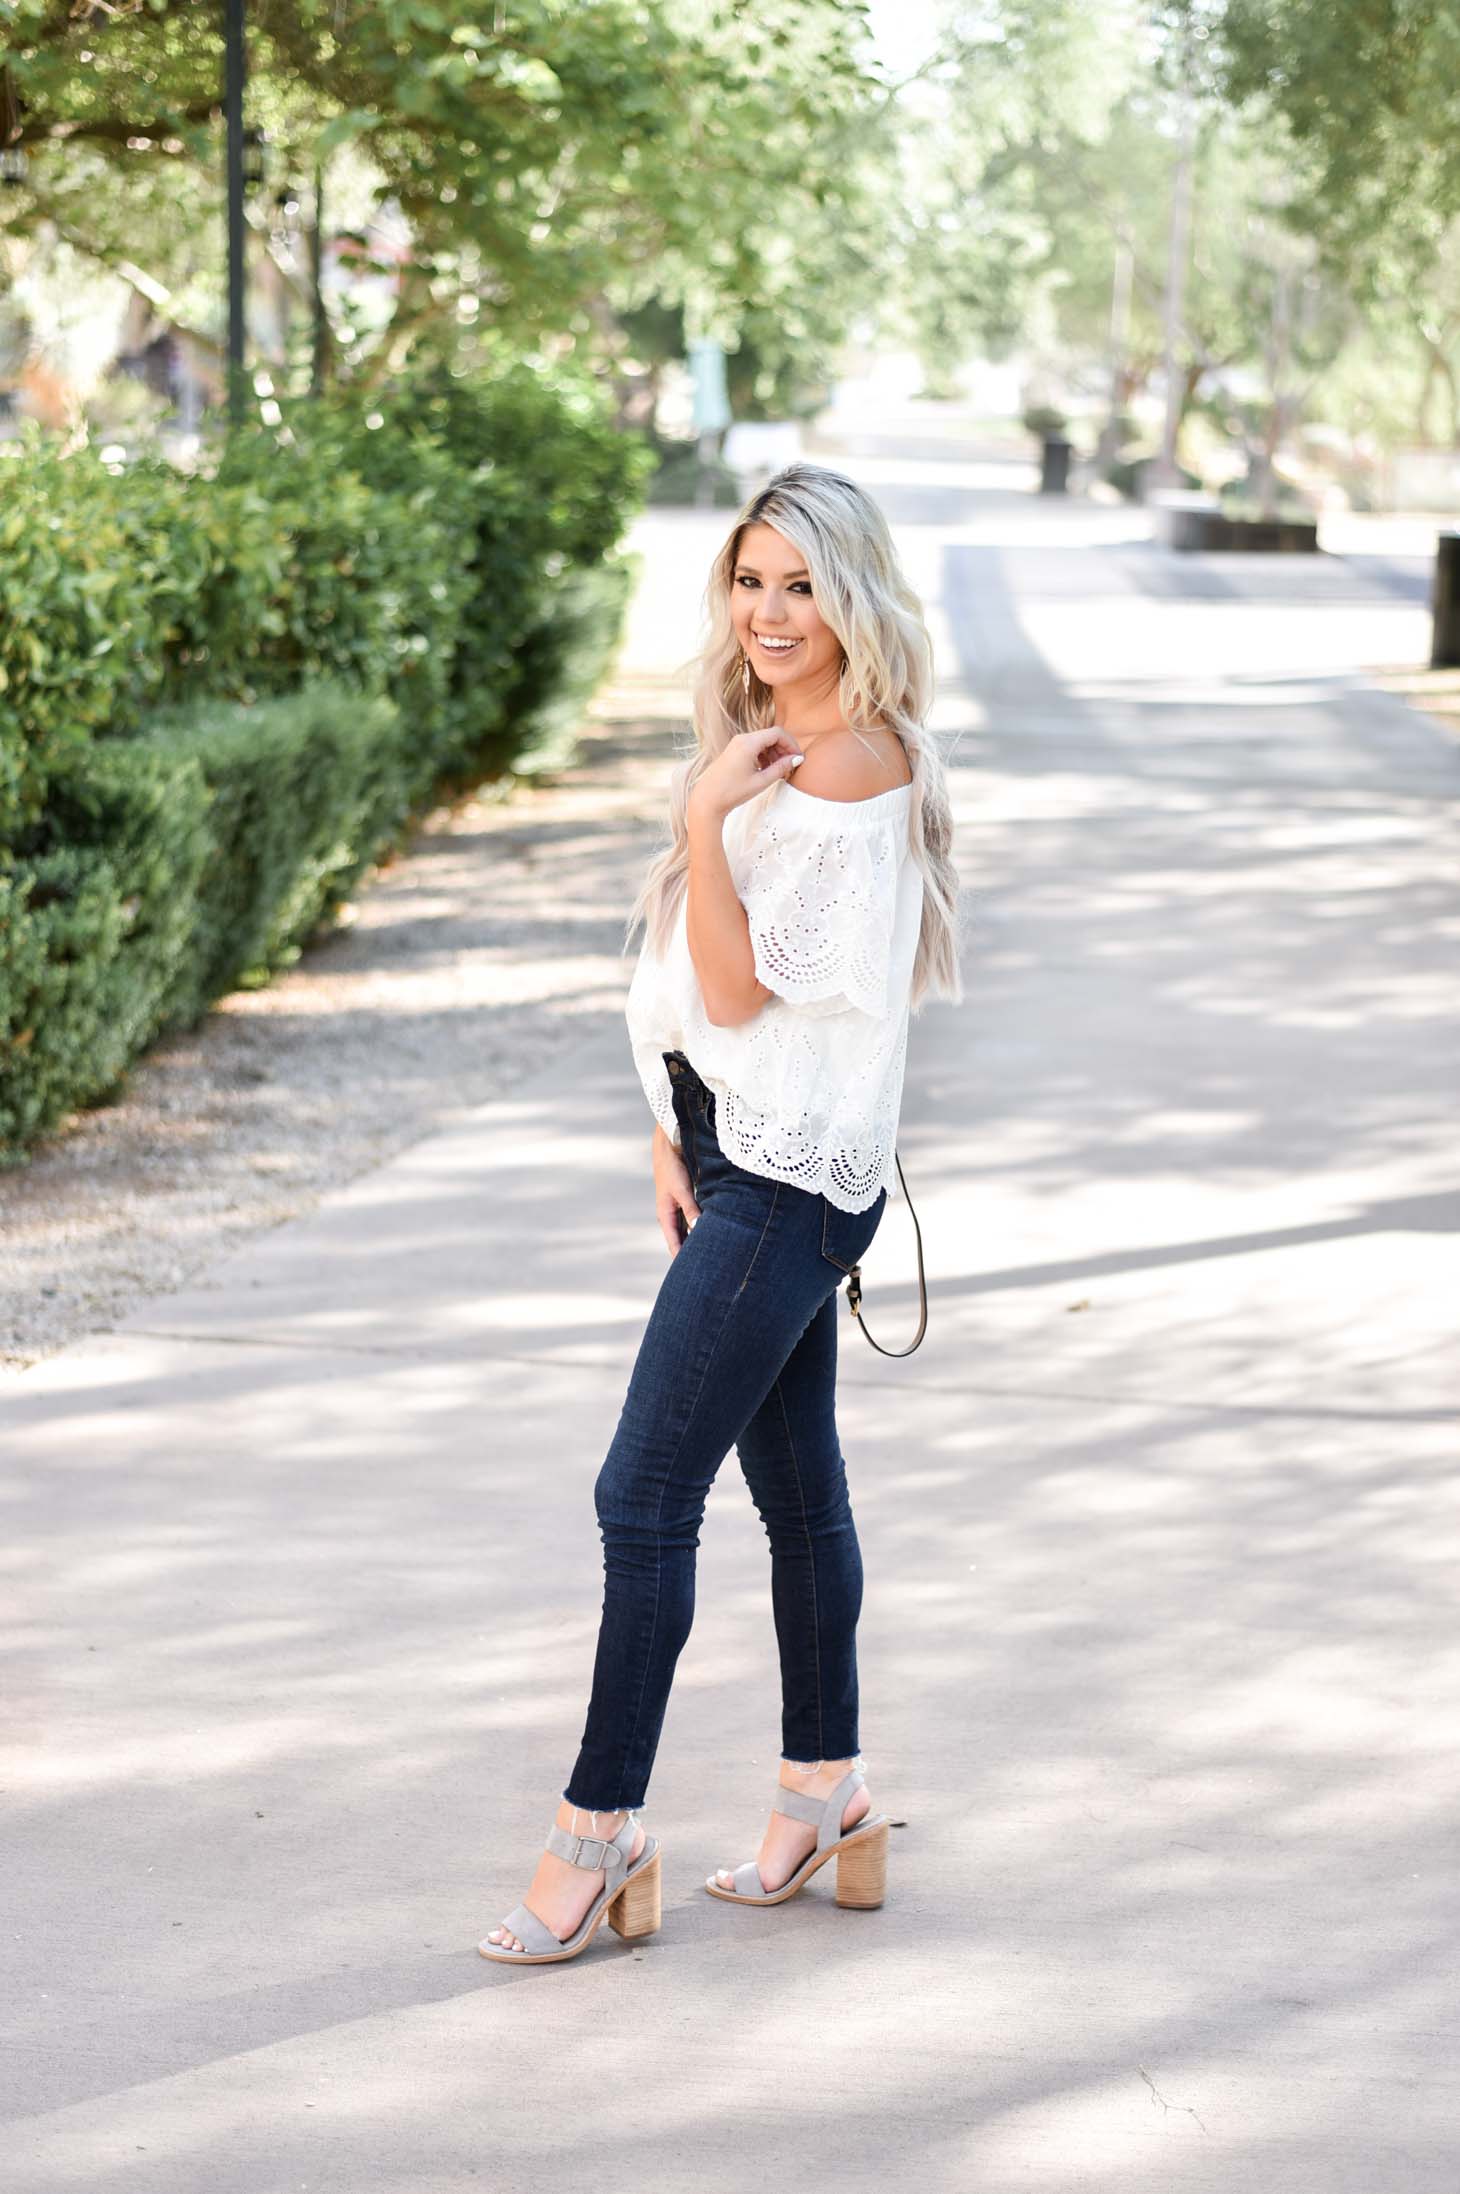 Erin Elizabeth of Wink and a Twirl shares the cutest white eyelet off the shoulder top from Jess Lea Boutique